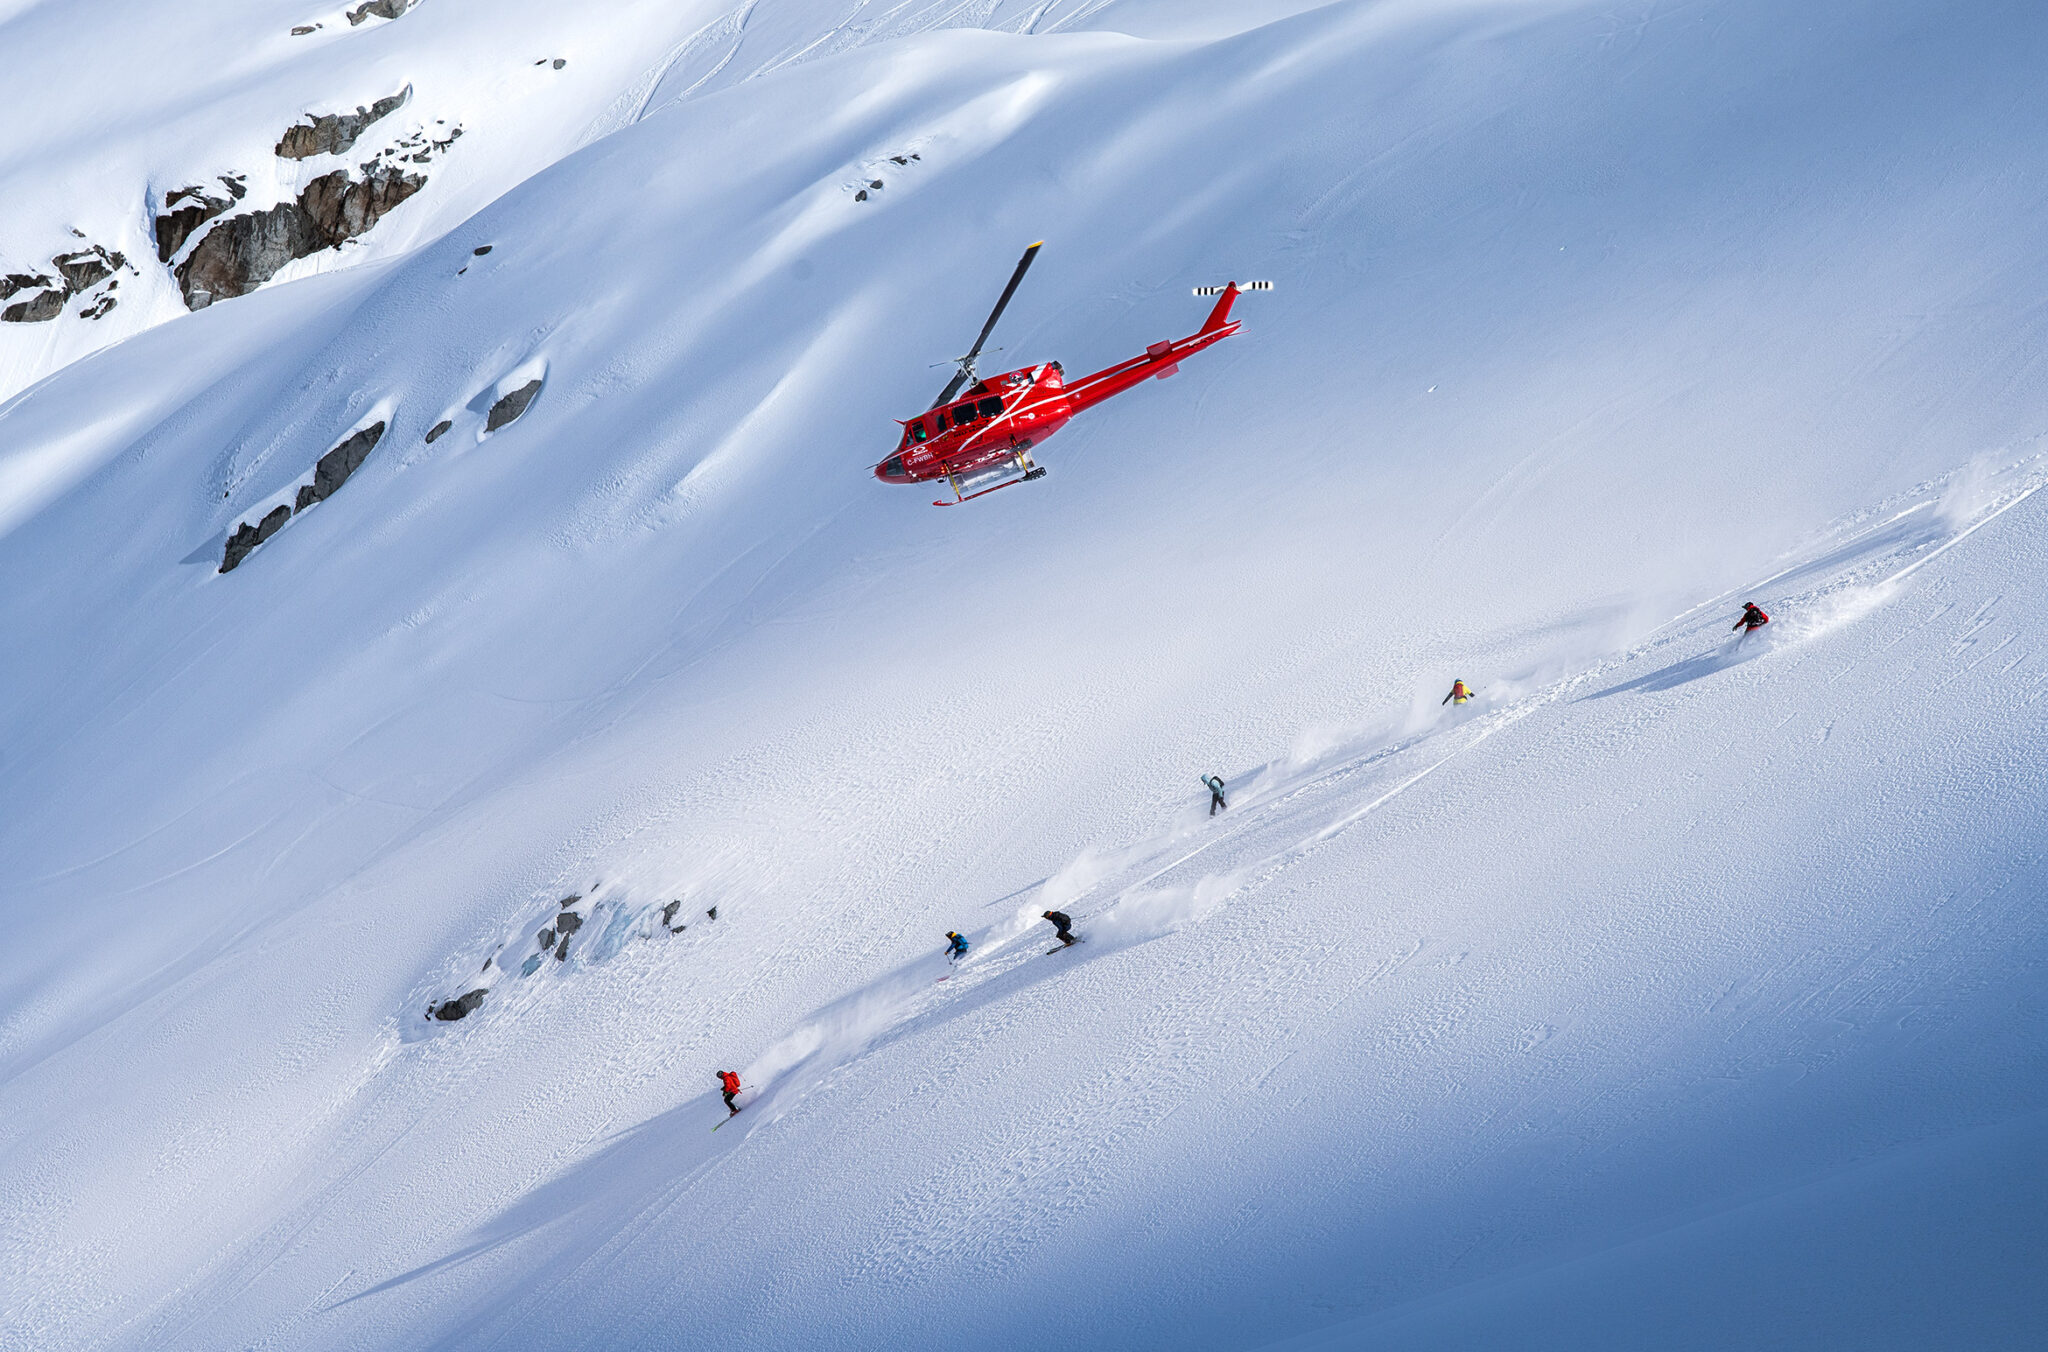 Heli skiers head down powdery slopes with a helicopter flying above them.